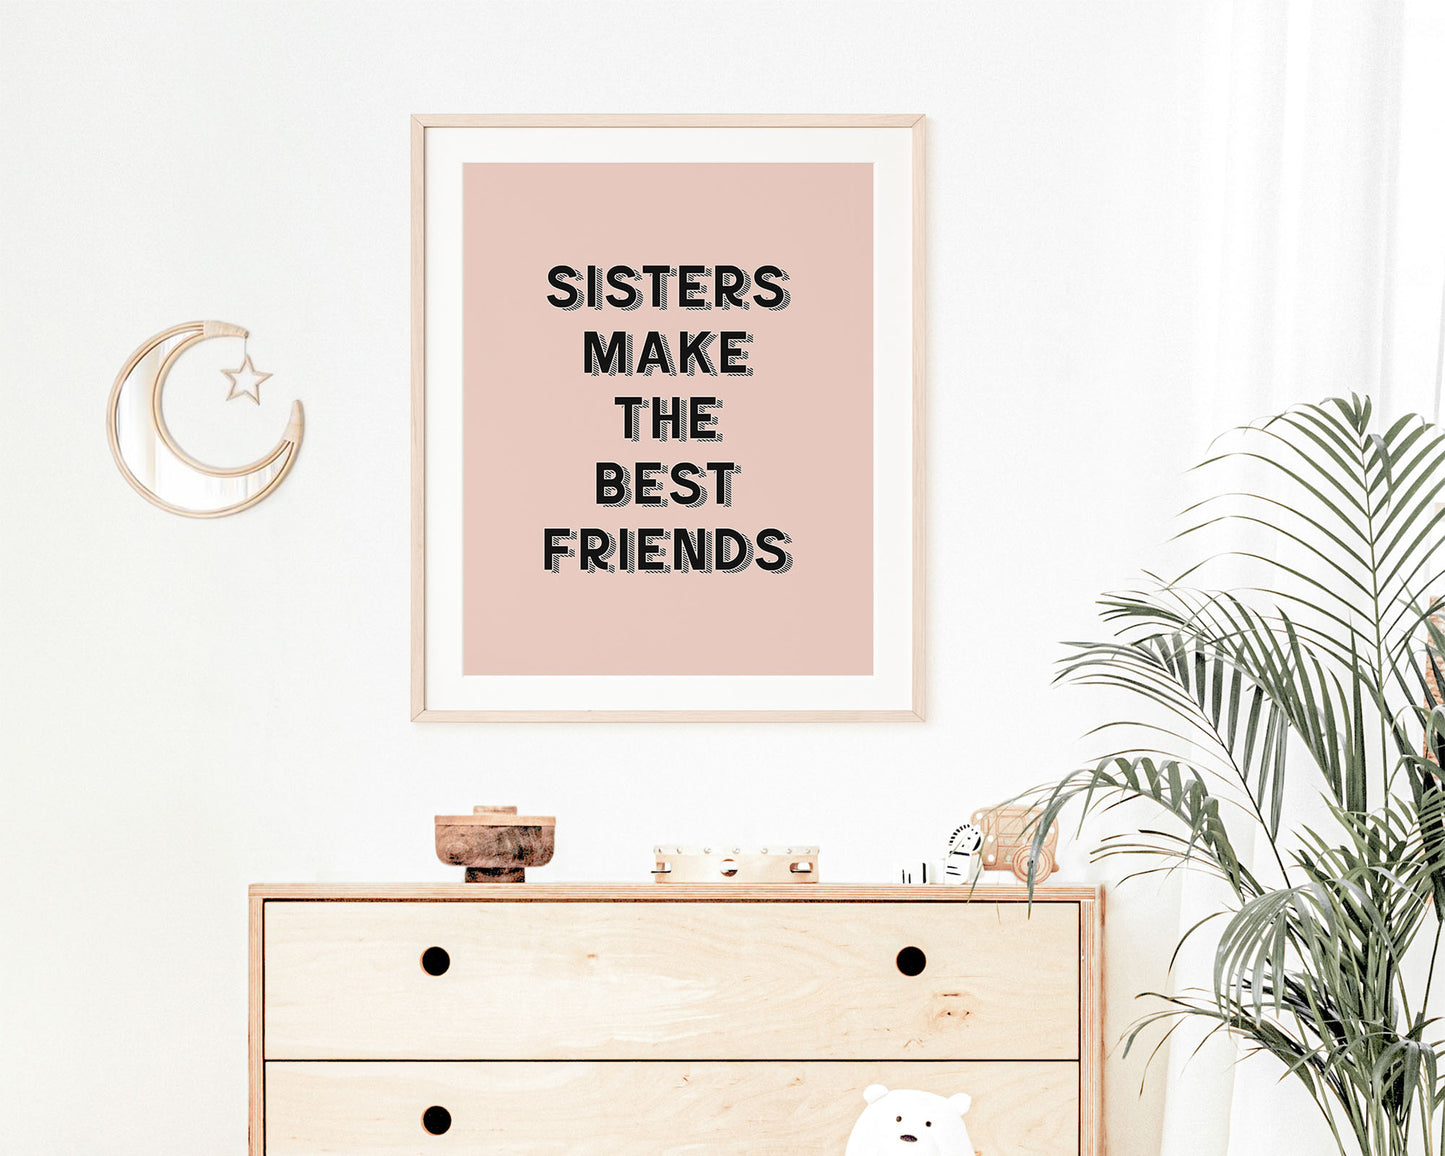 Sisters Make The Best Friends Instant Download Digital File featuring retro block shadowed lettering in black on a blush pink background.